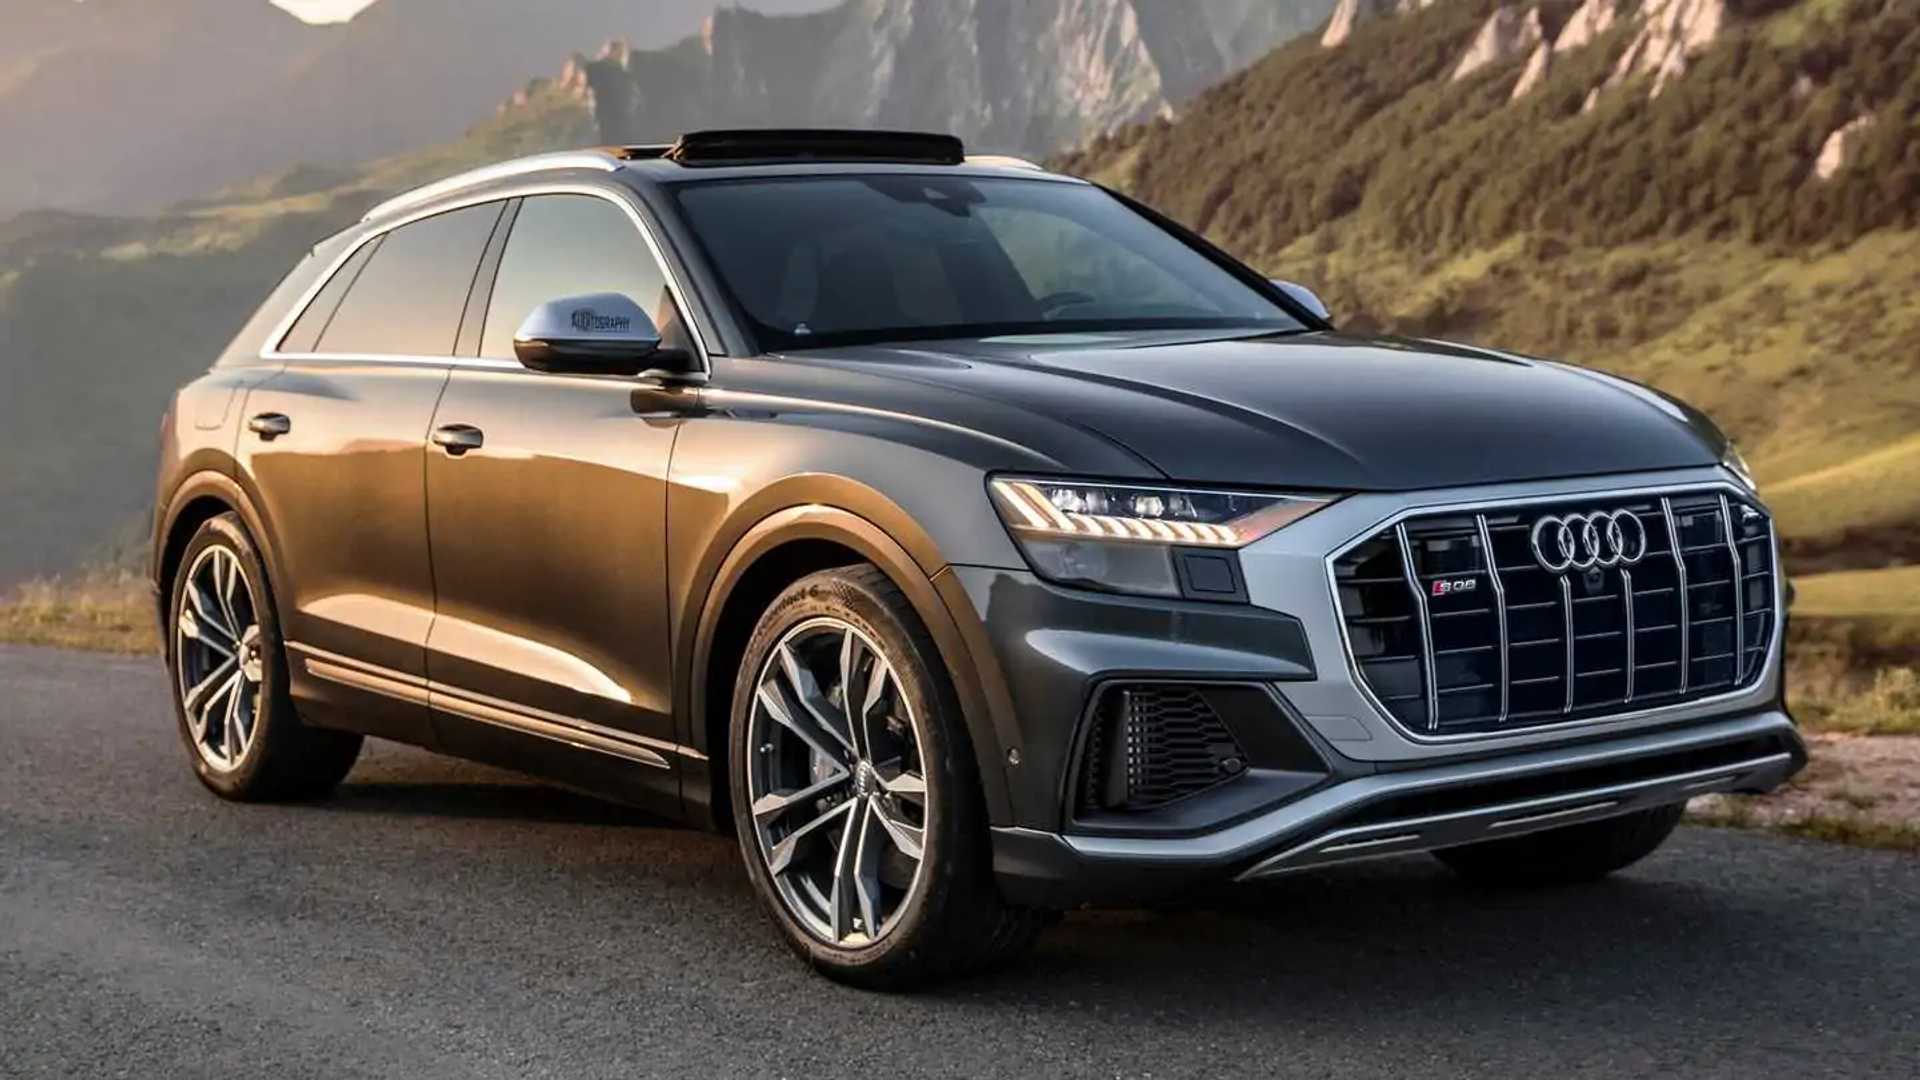 2020 Audi SQ8 first videos highlight the diesel SUV monster